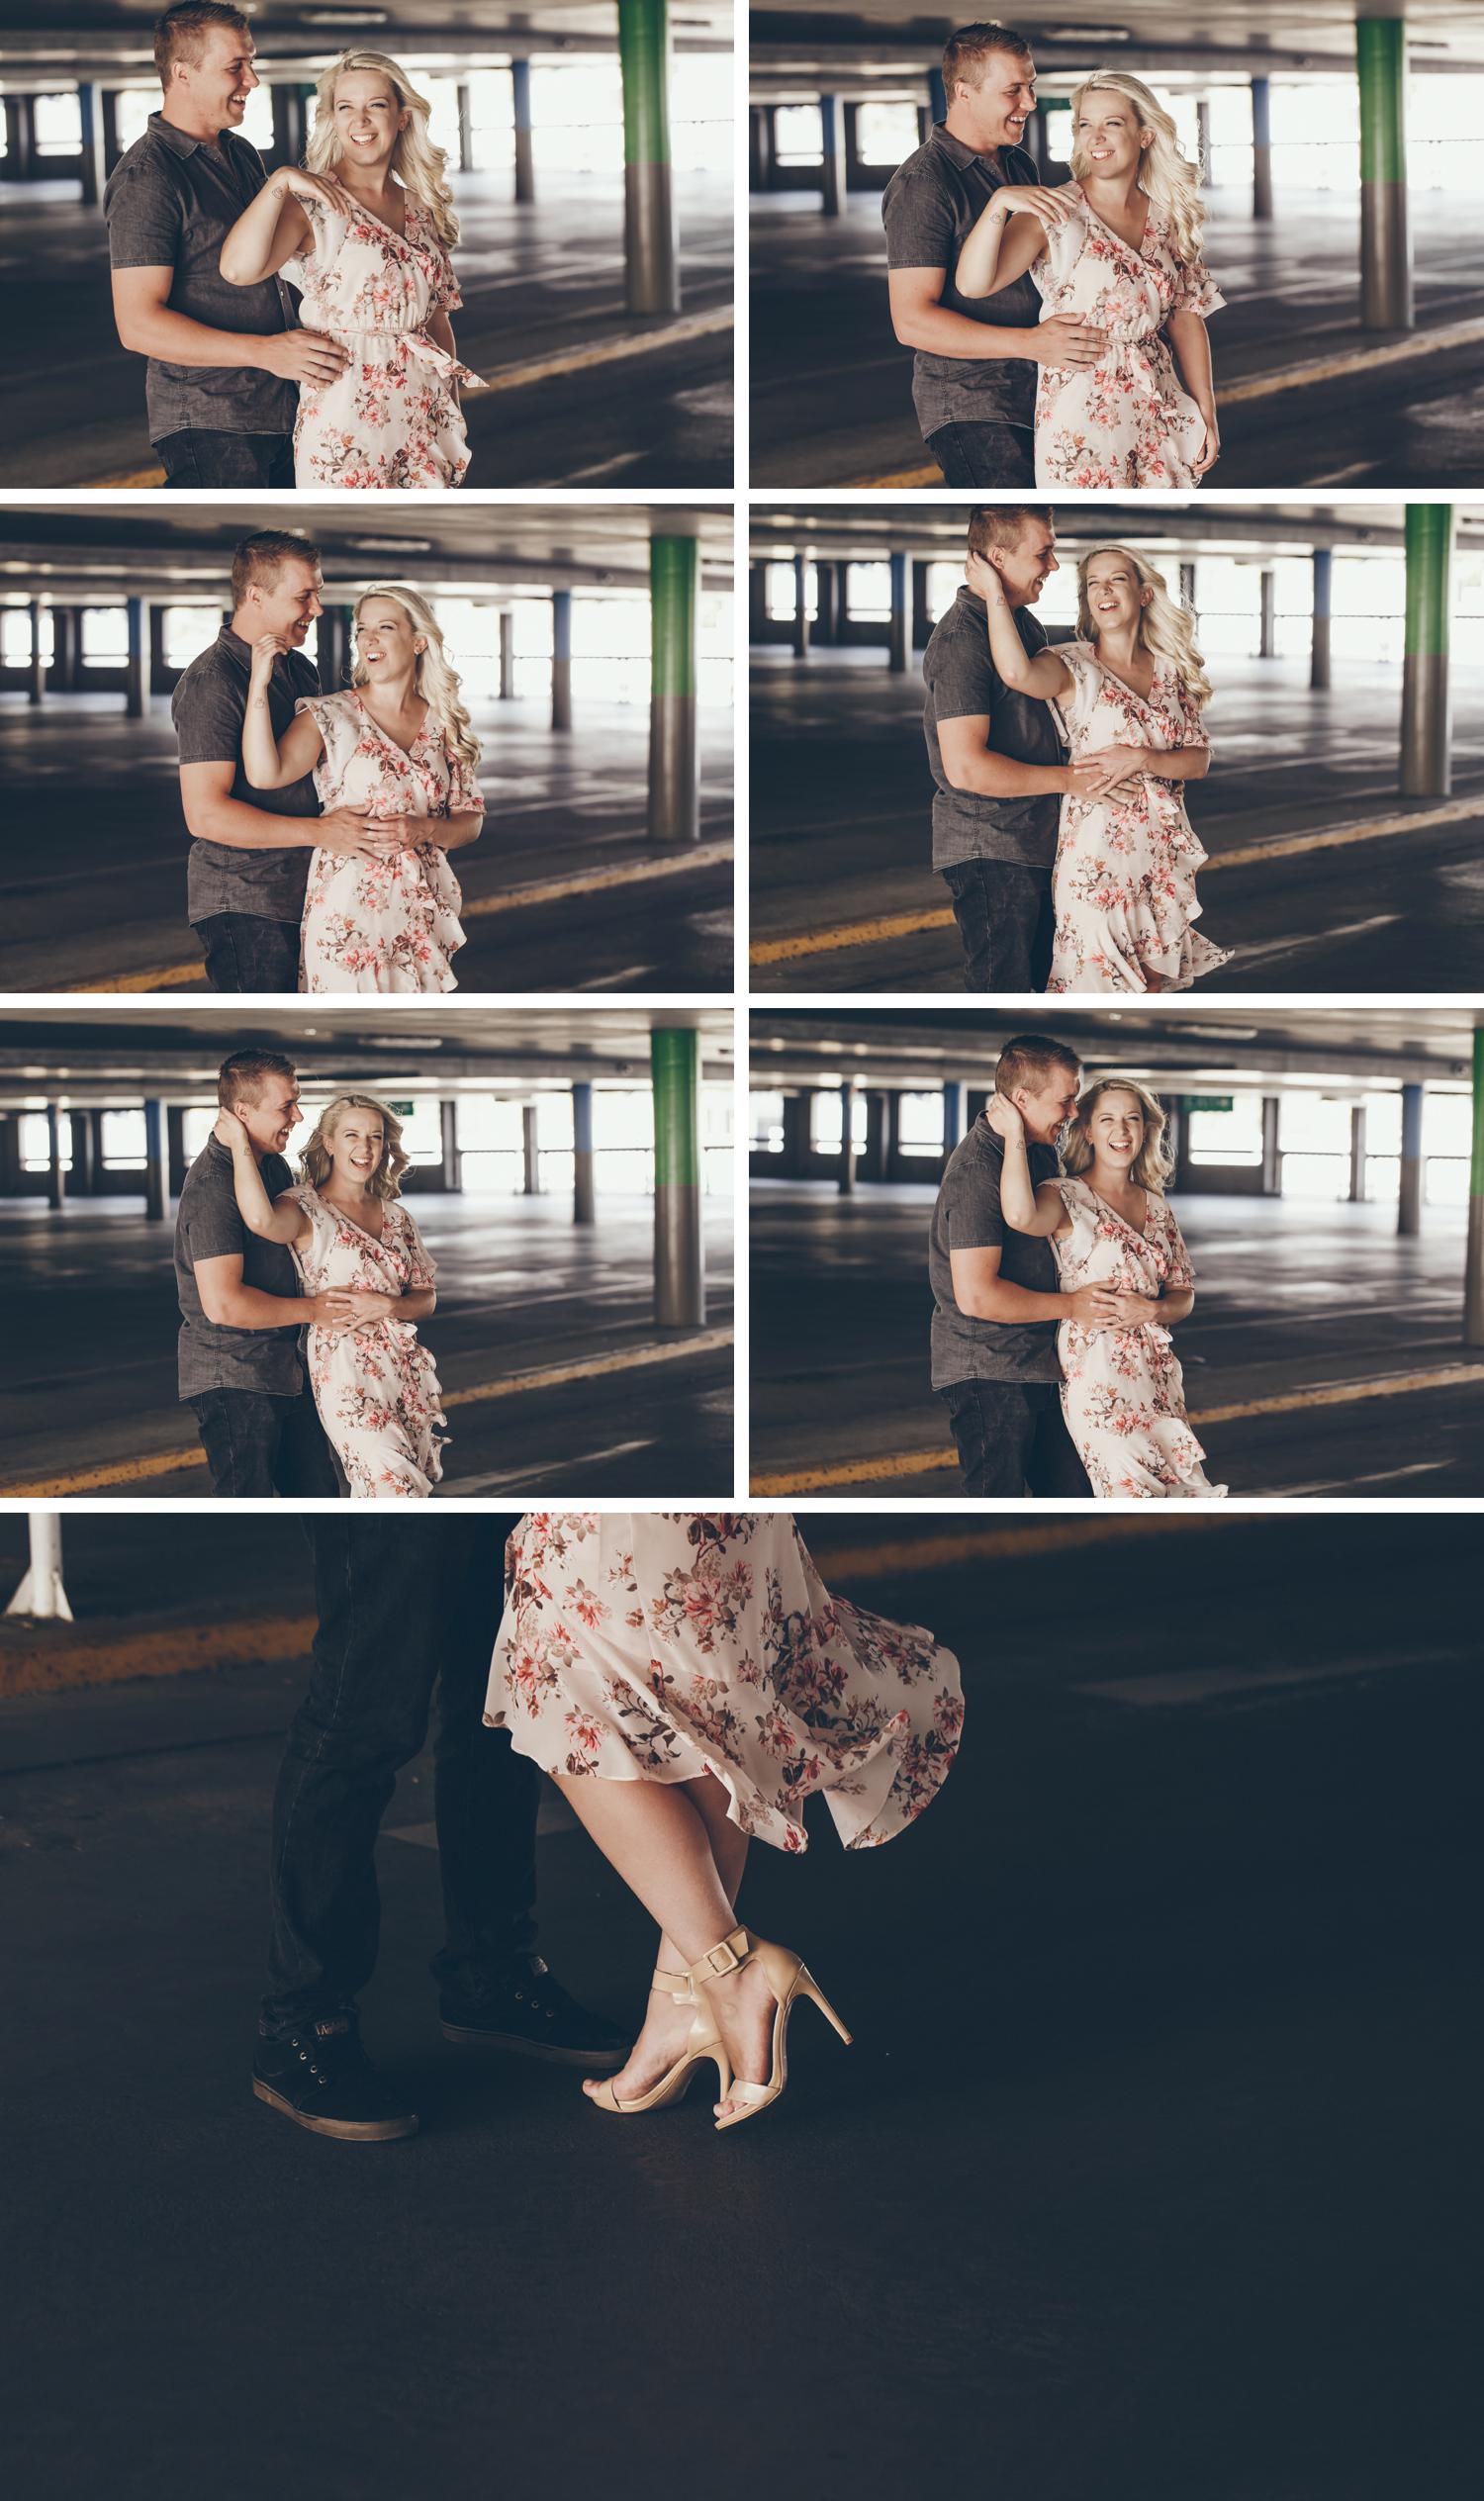 Couple Embracing Car Park Engagement Shoot, Wide Angle Shot of Bride and Groom Embracing by Danae Studios